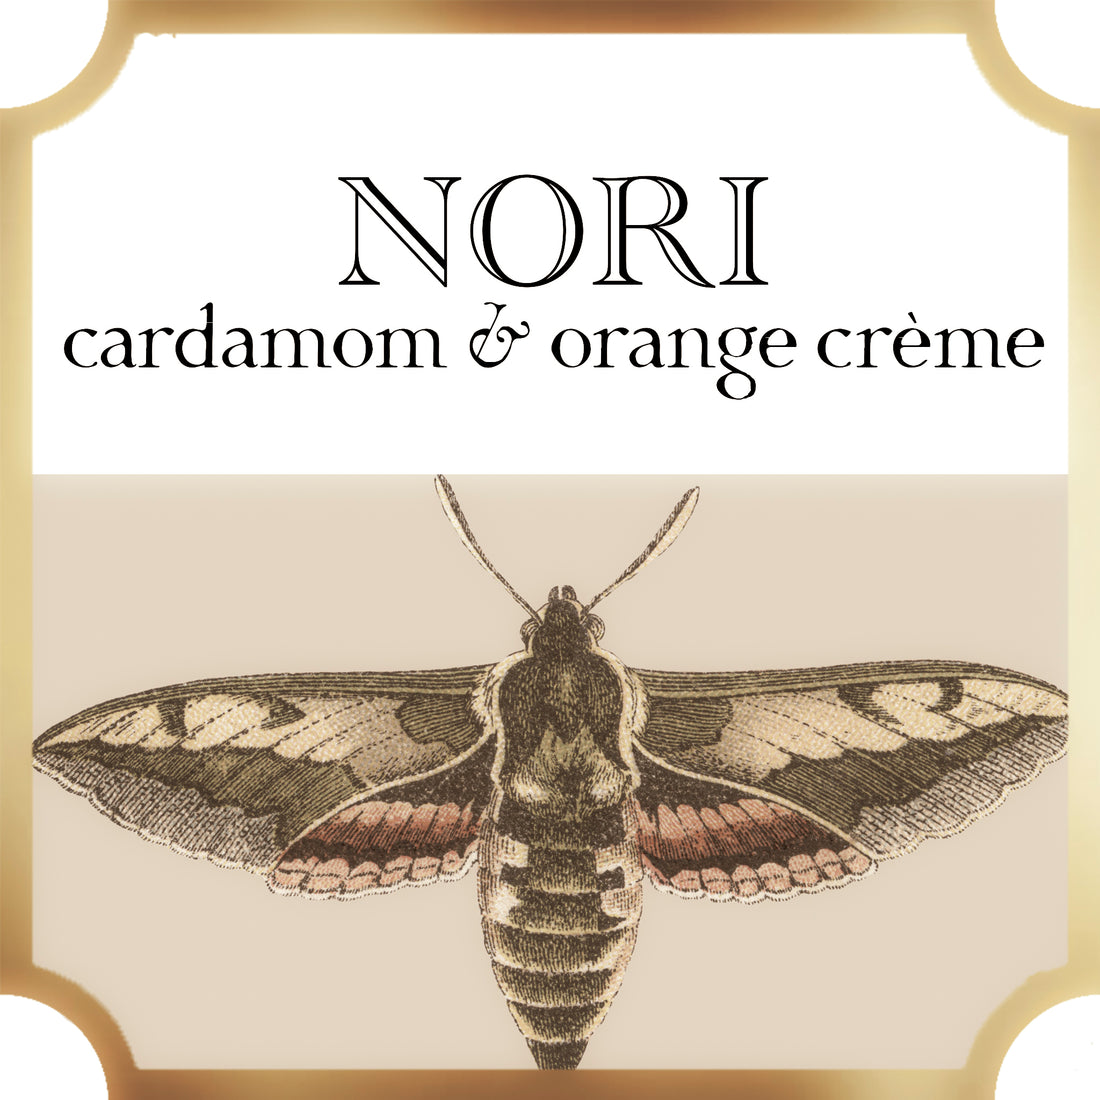  nori collection a pleasant thought